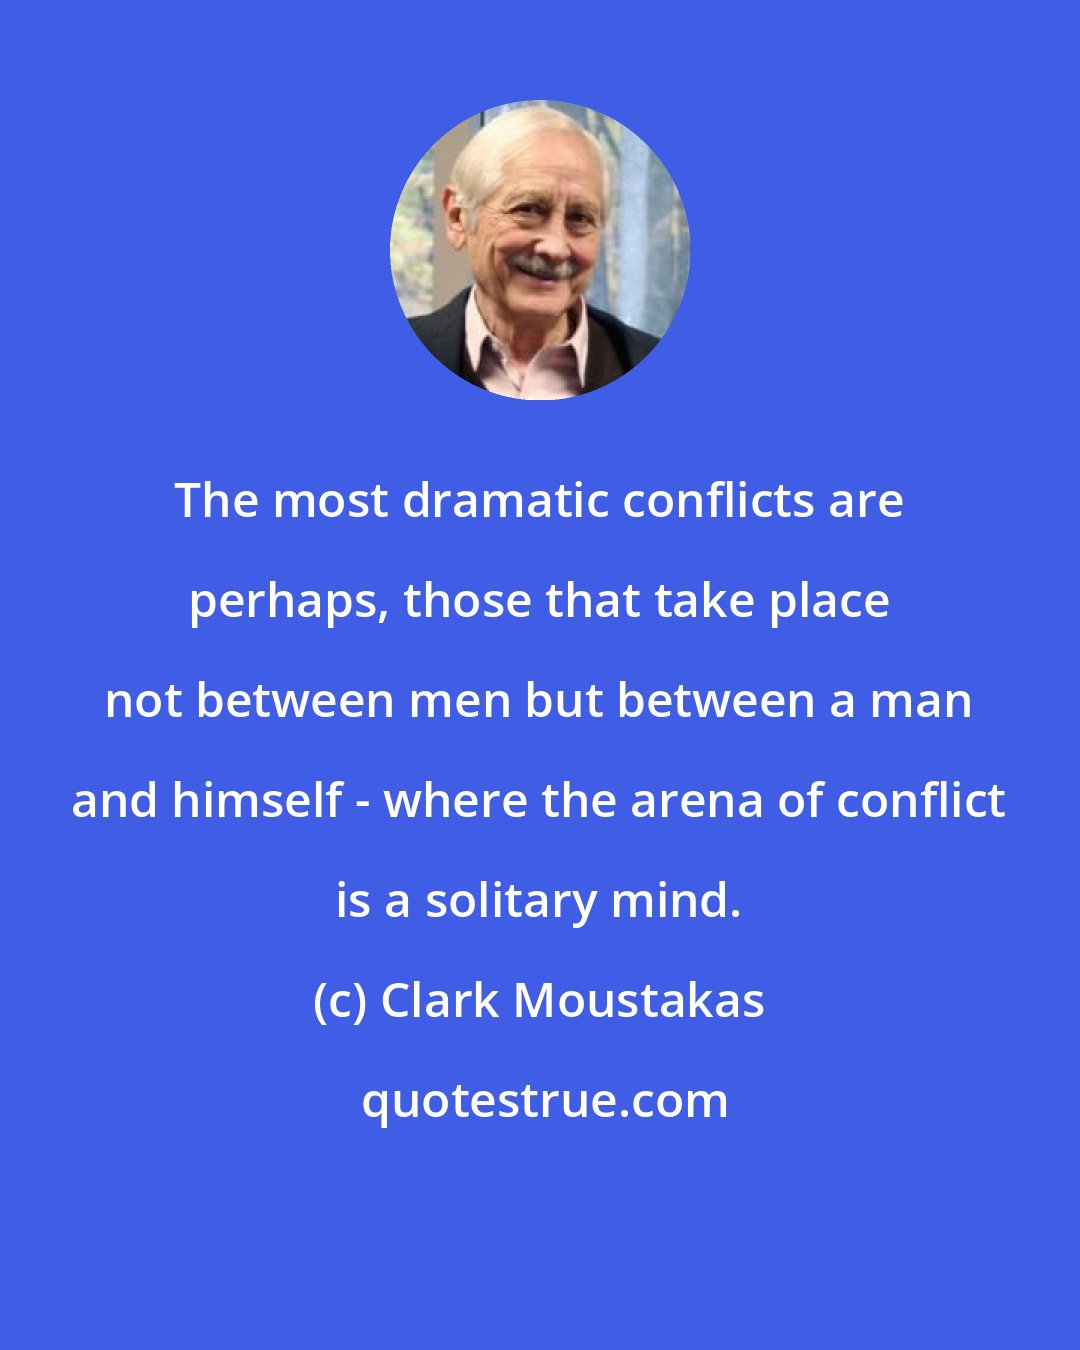 Clark Moustakas: The most dramatic conflicts are perhaps, those that take place not between men but between a man and himself - where the arena of conflict is a solitary mind.